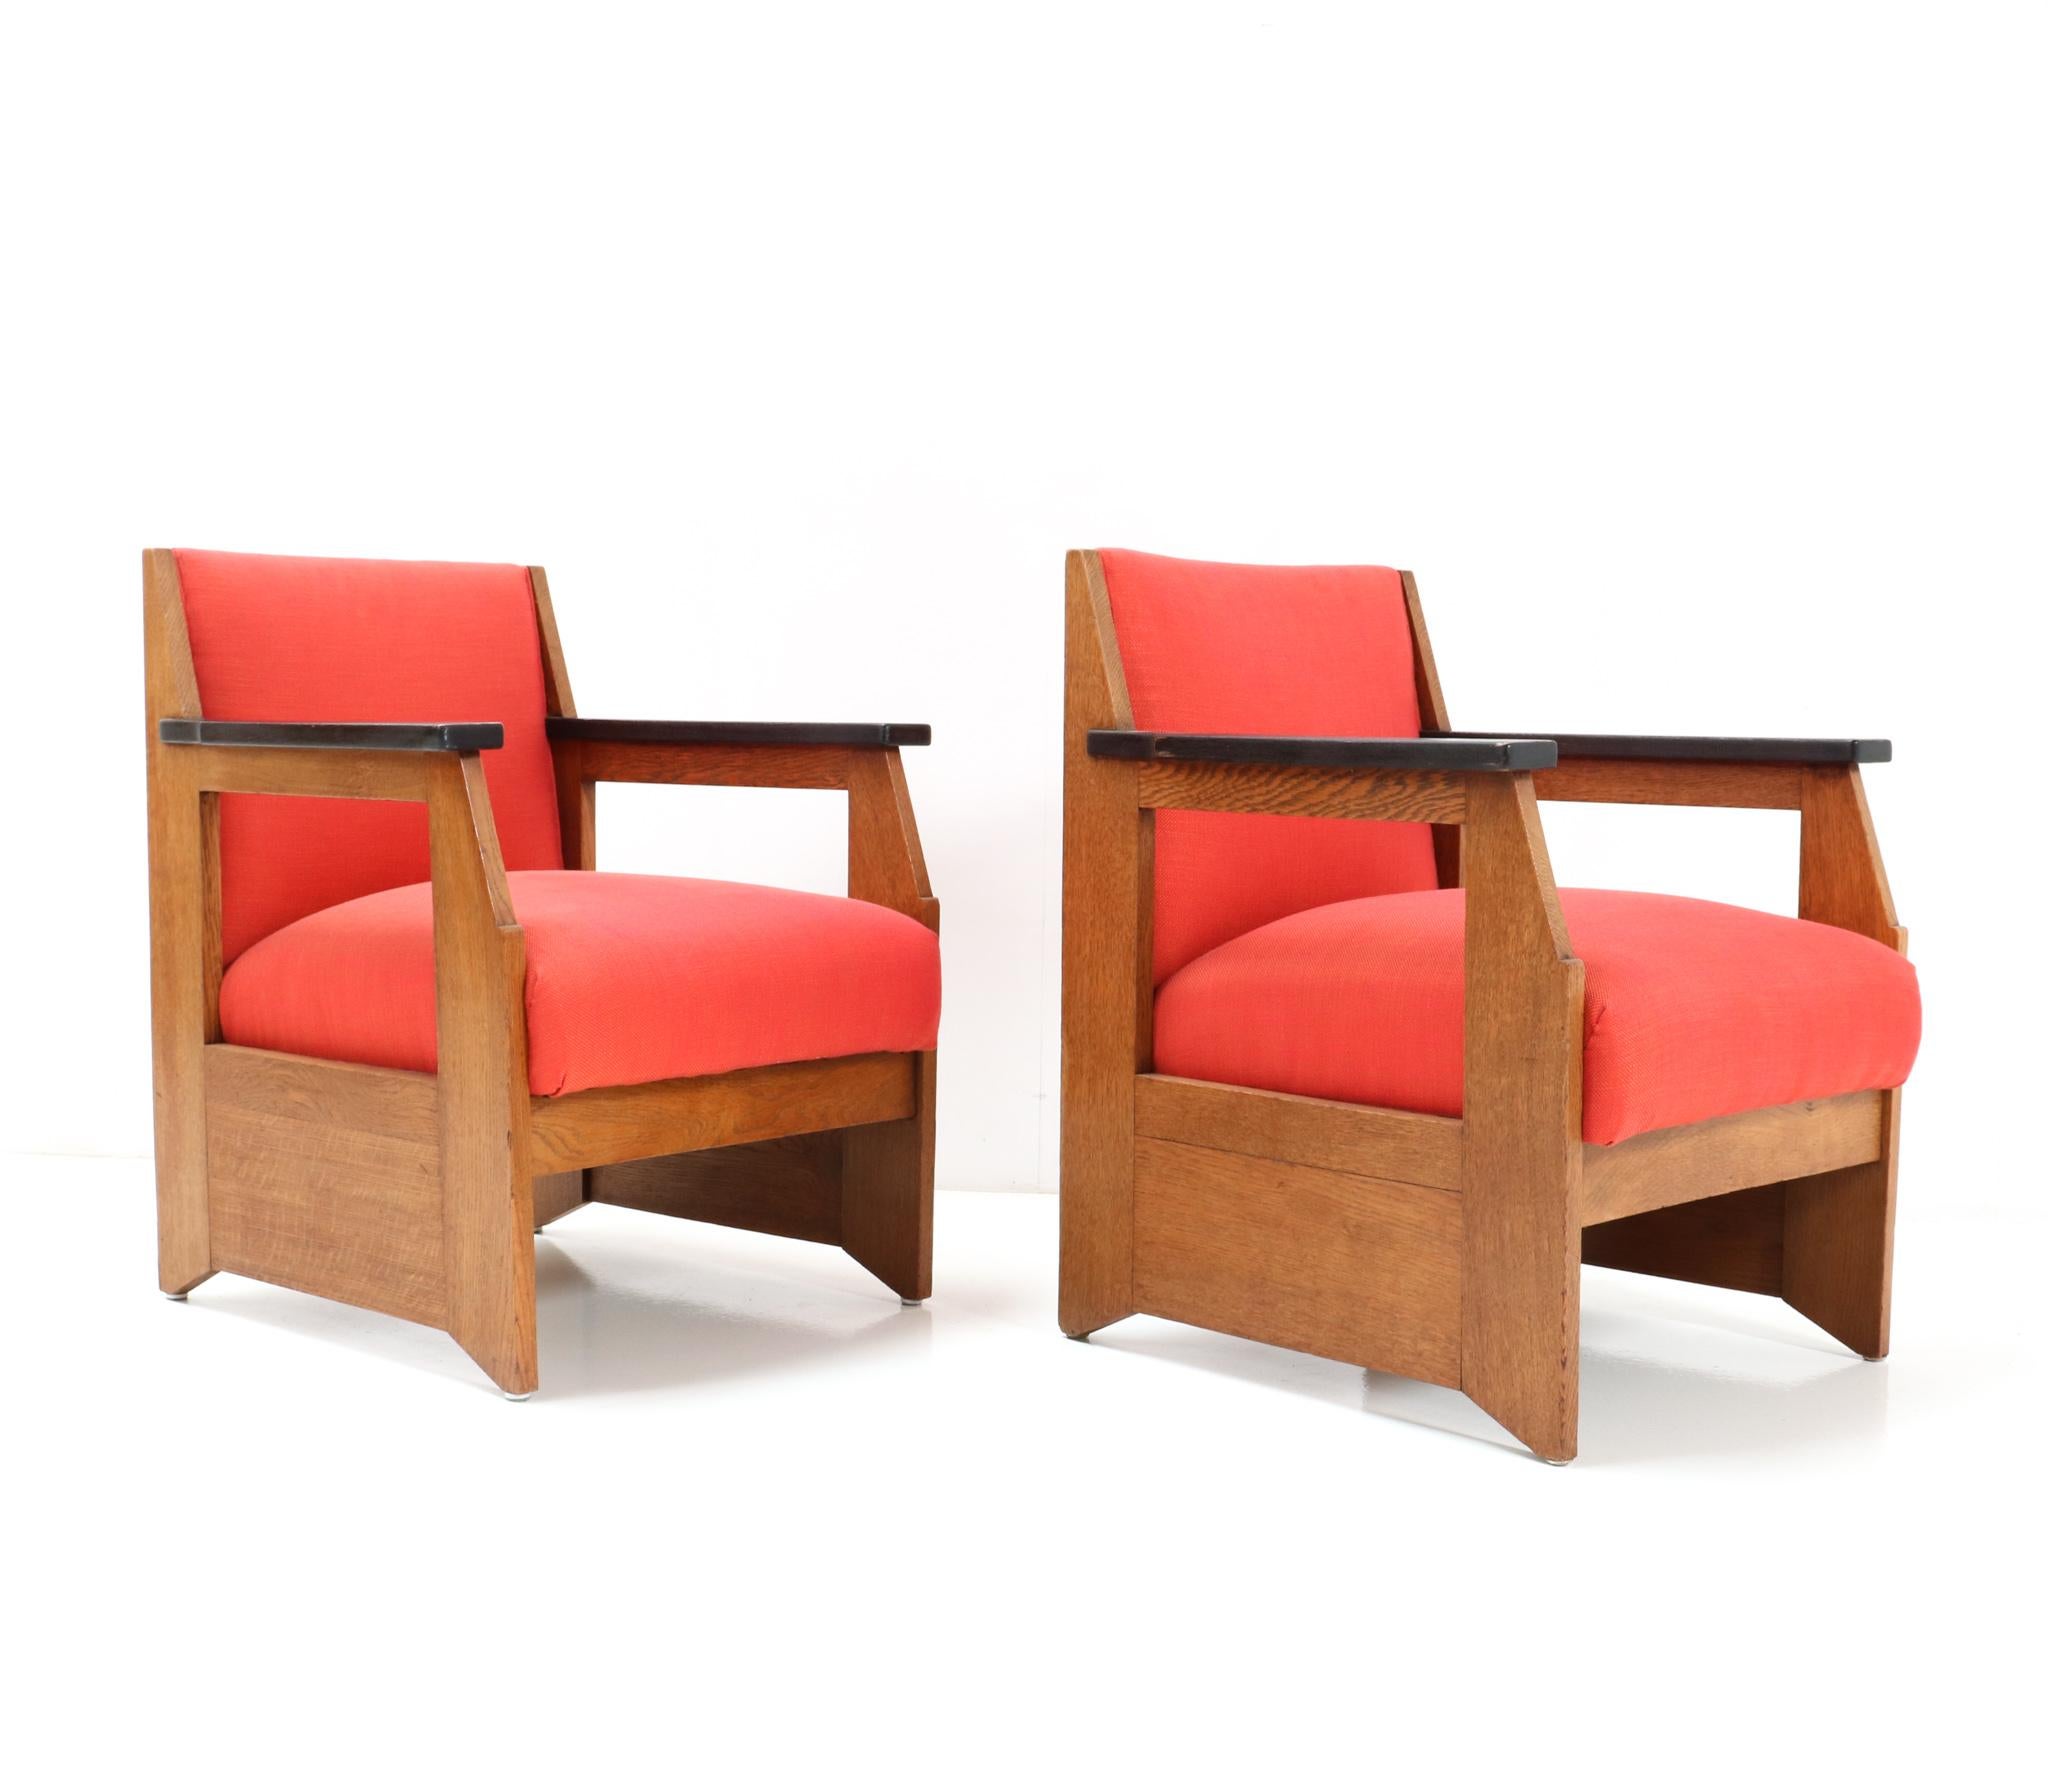 Dutch Pair of Oak Art Deco Modernist Easy Chairs by Hendrik Wouda for Pander, 1924 For Sale